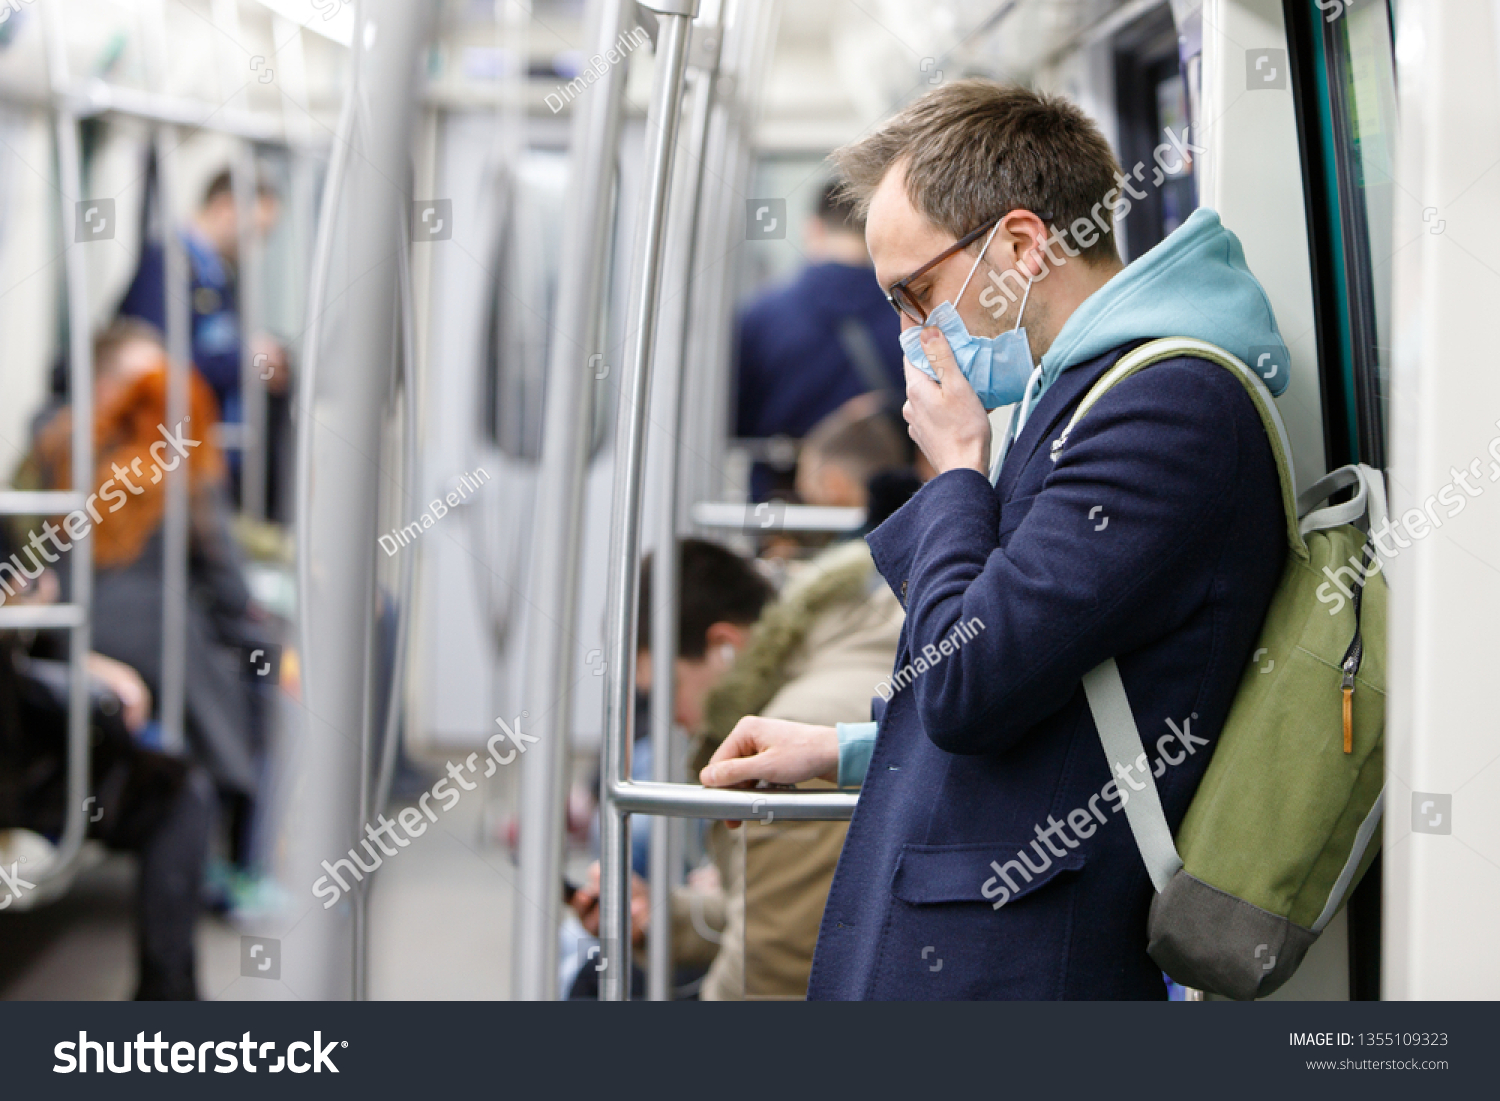 Ill man in glasses feeling sick, coughing, wearing protective mask against transmissible infectious diseases and as protection against the flu in public transport. New coronavirus 2019-nCoV from China #1355109323